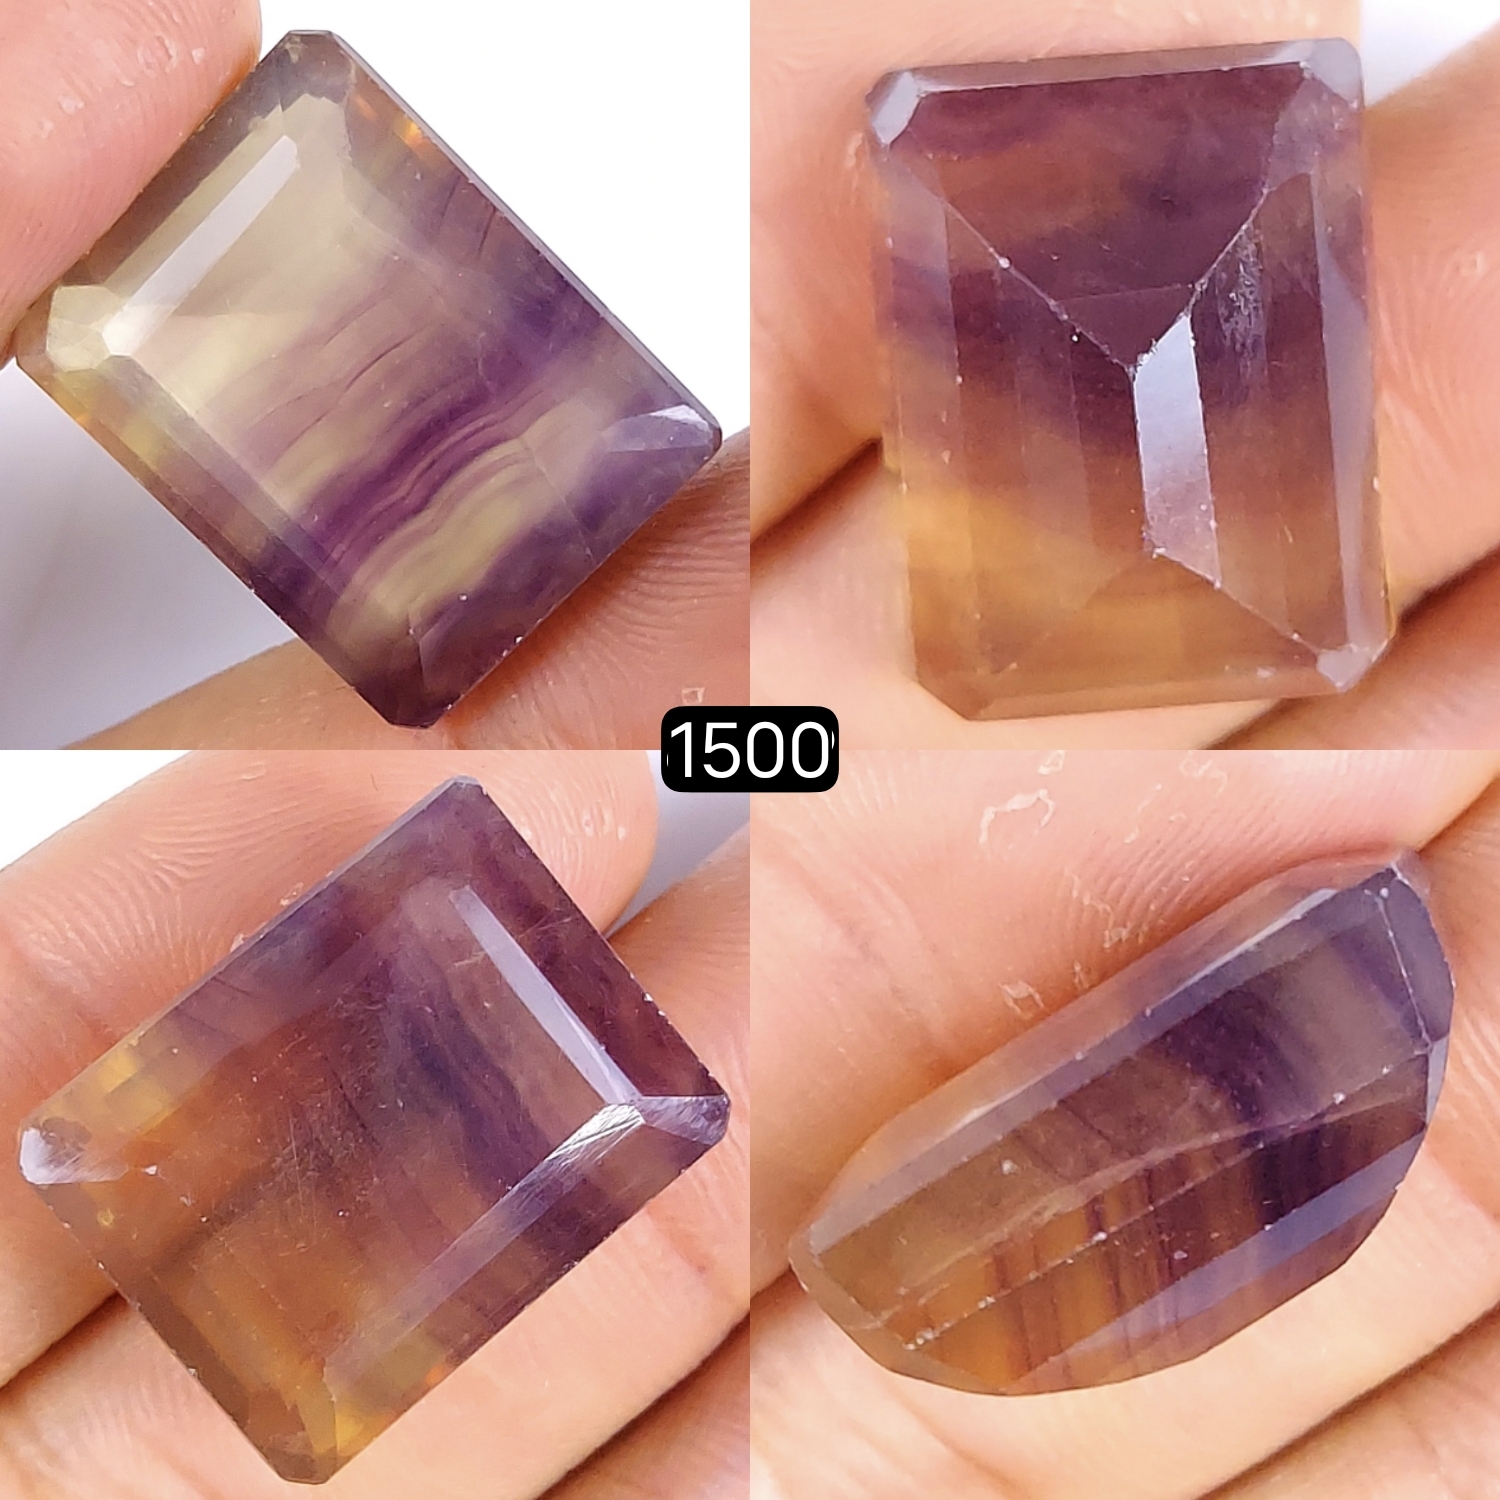 1Pcs 50Cts Natural Multi Flourite Faceted Rectangle Loose Gemstone24x19mm#1500